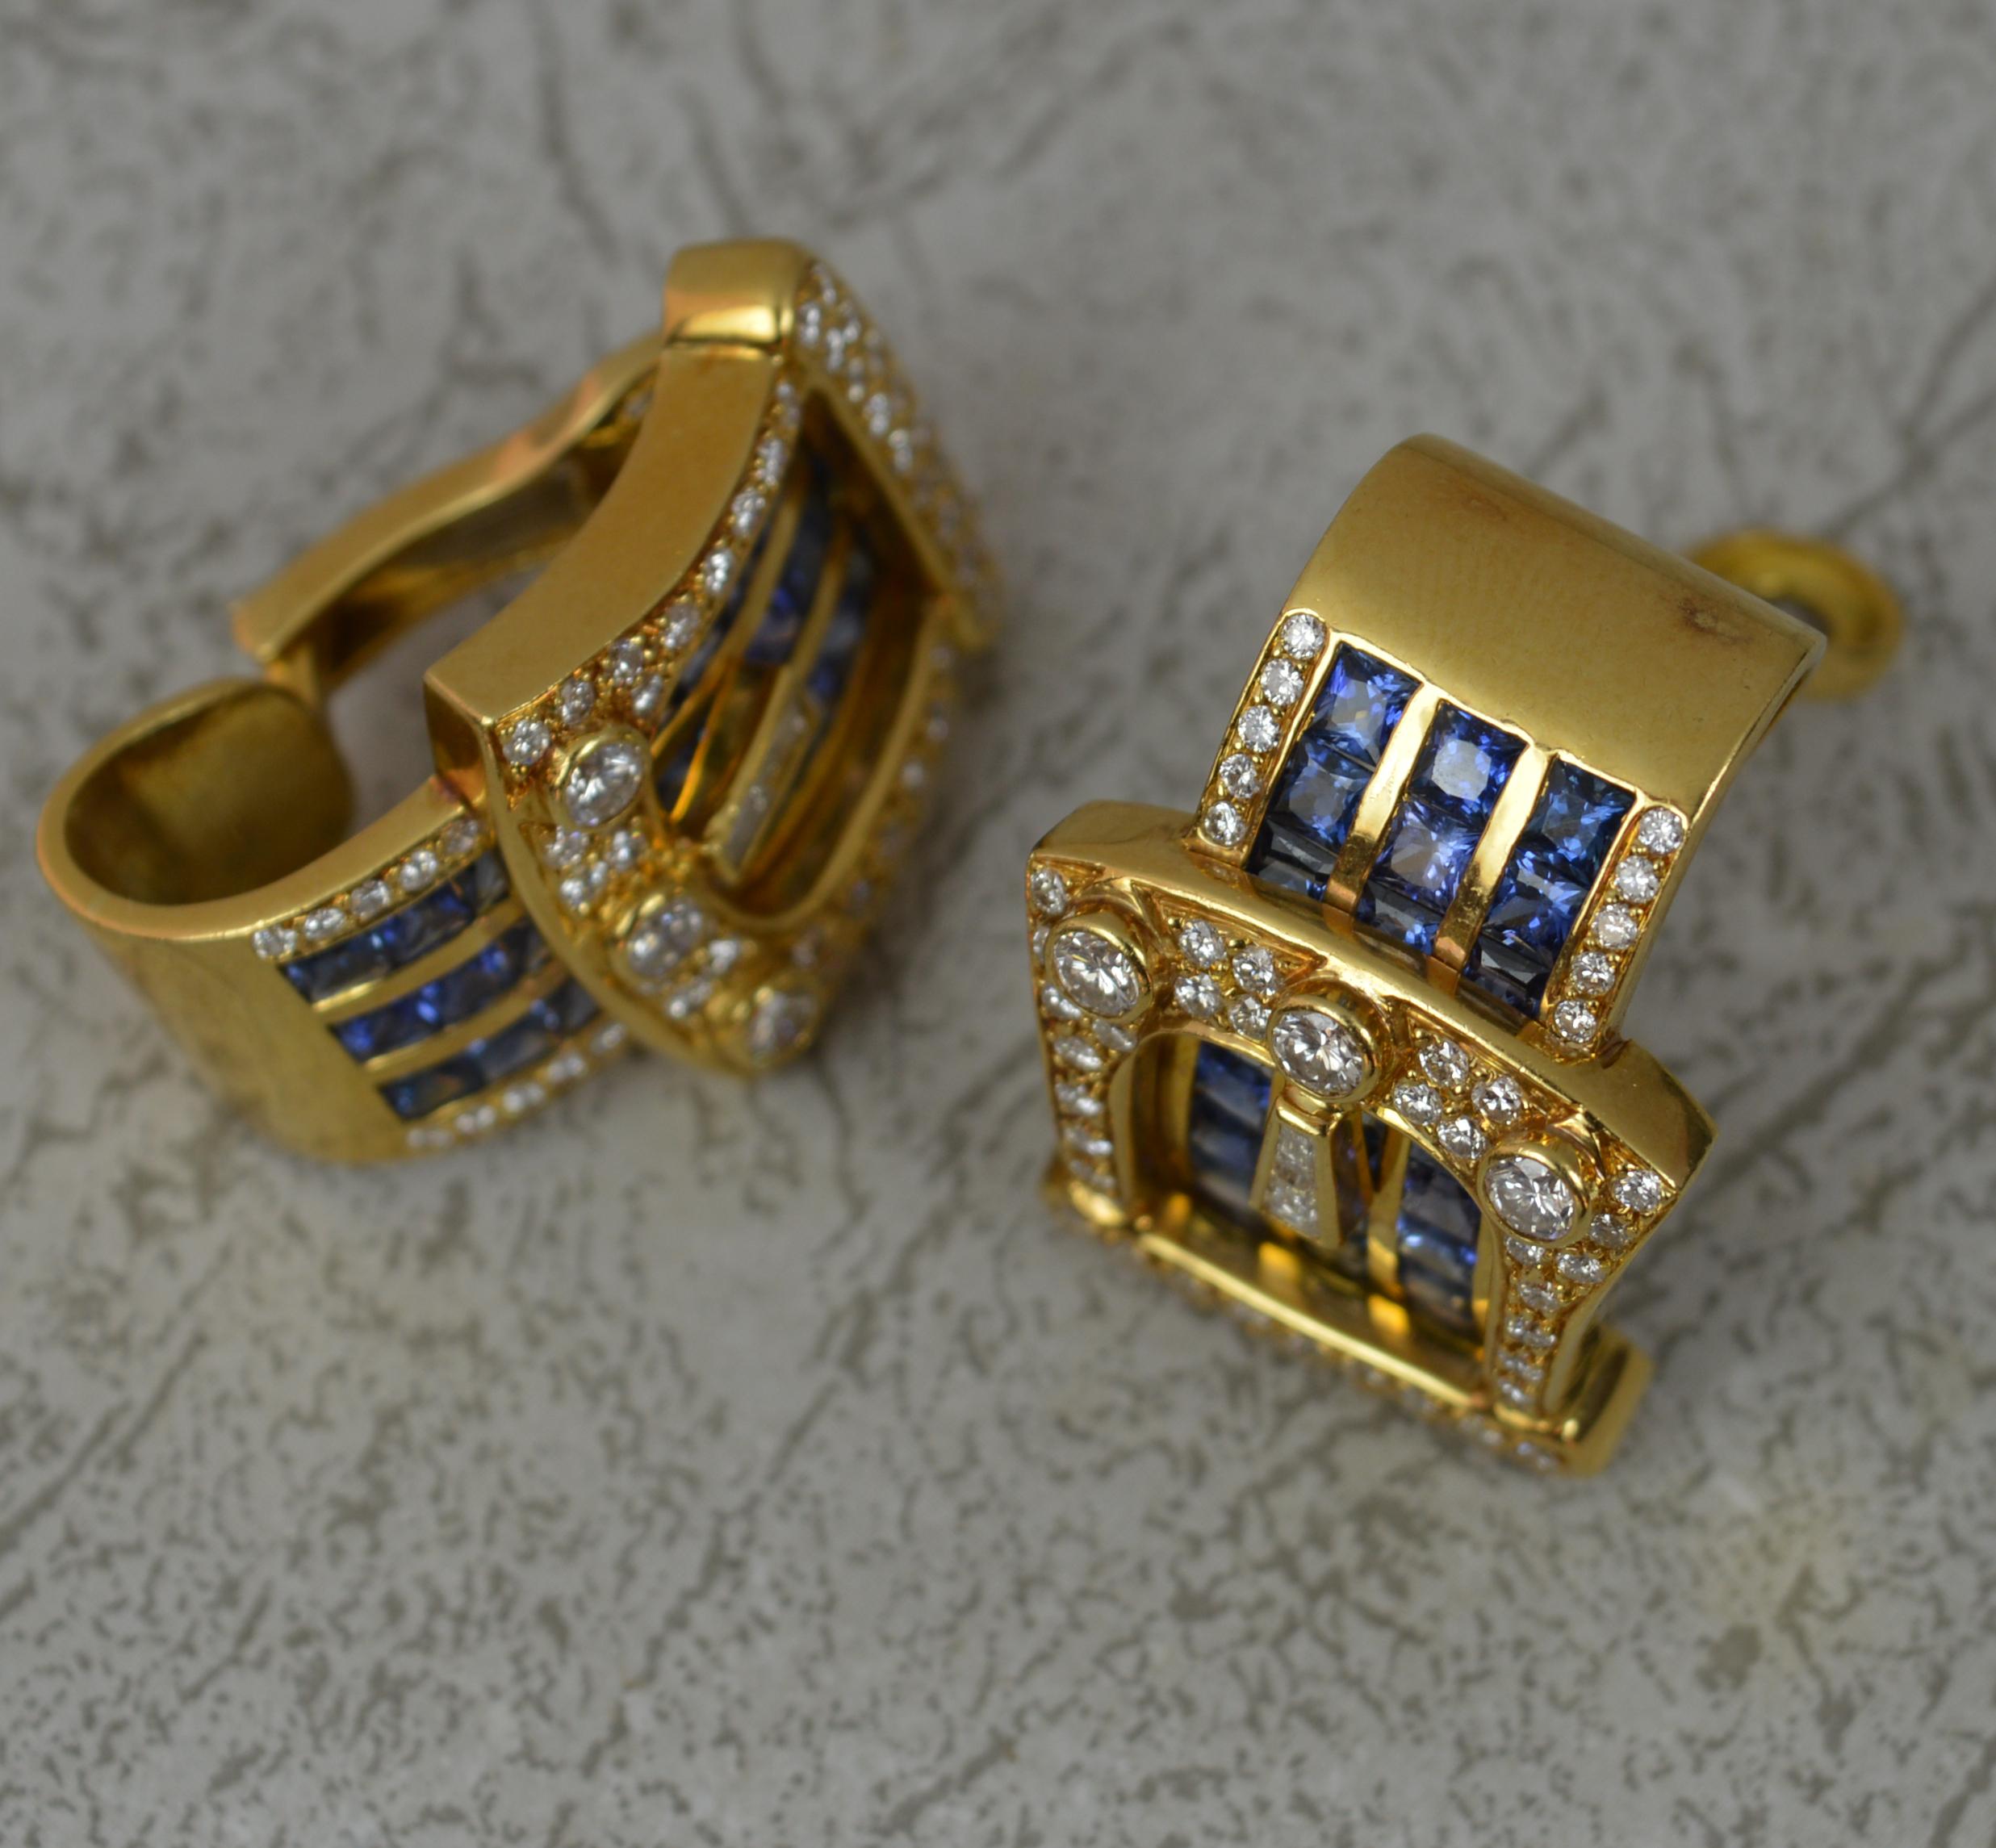 A superb pair of Sapphire and Diamond cluster earrings.
Solid 18 carat yellow gold. Exceedingly heavy.
The buckle designs are set with many round brilliant cut diamonds, Vs clarity, g-h colour, 2.00 carats total. Set with three columns of princess